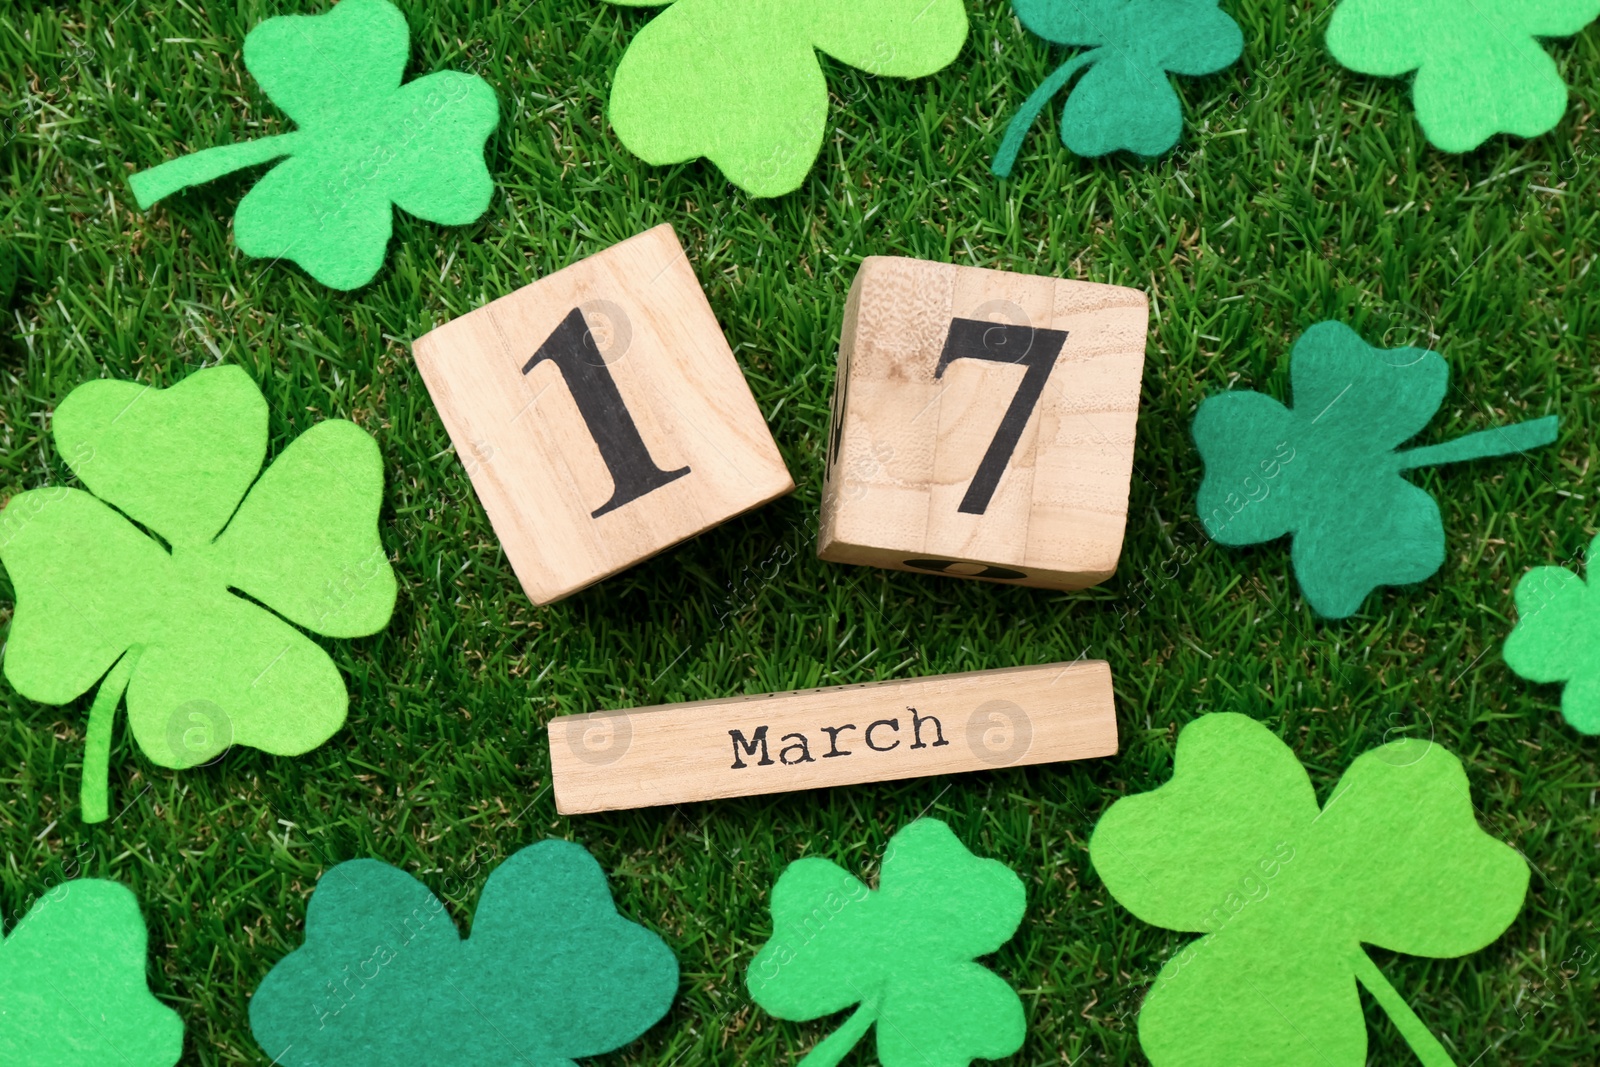 Photo of St. Patrick's day - 17th of March. Wooden block calendar and felt clover leaves on green grass, flat lay